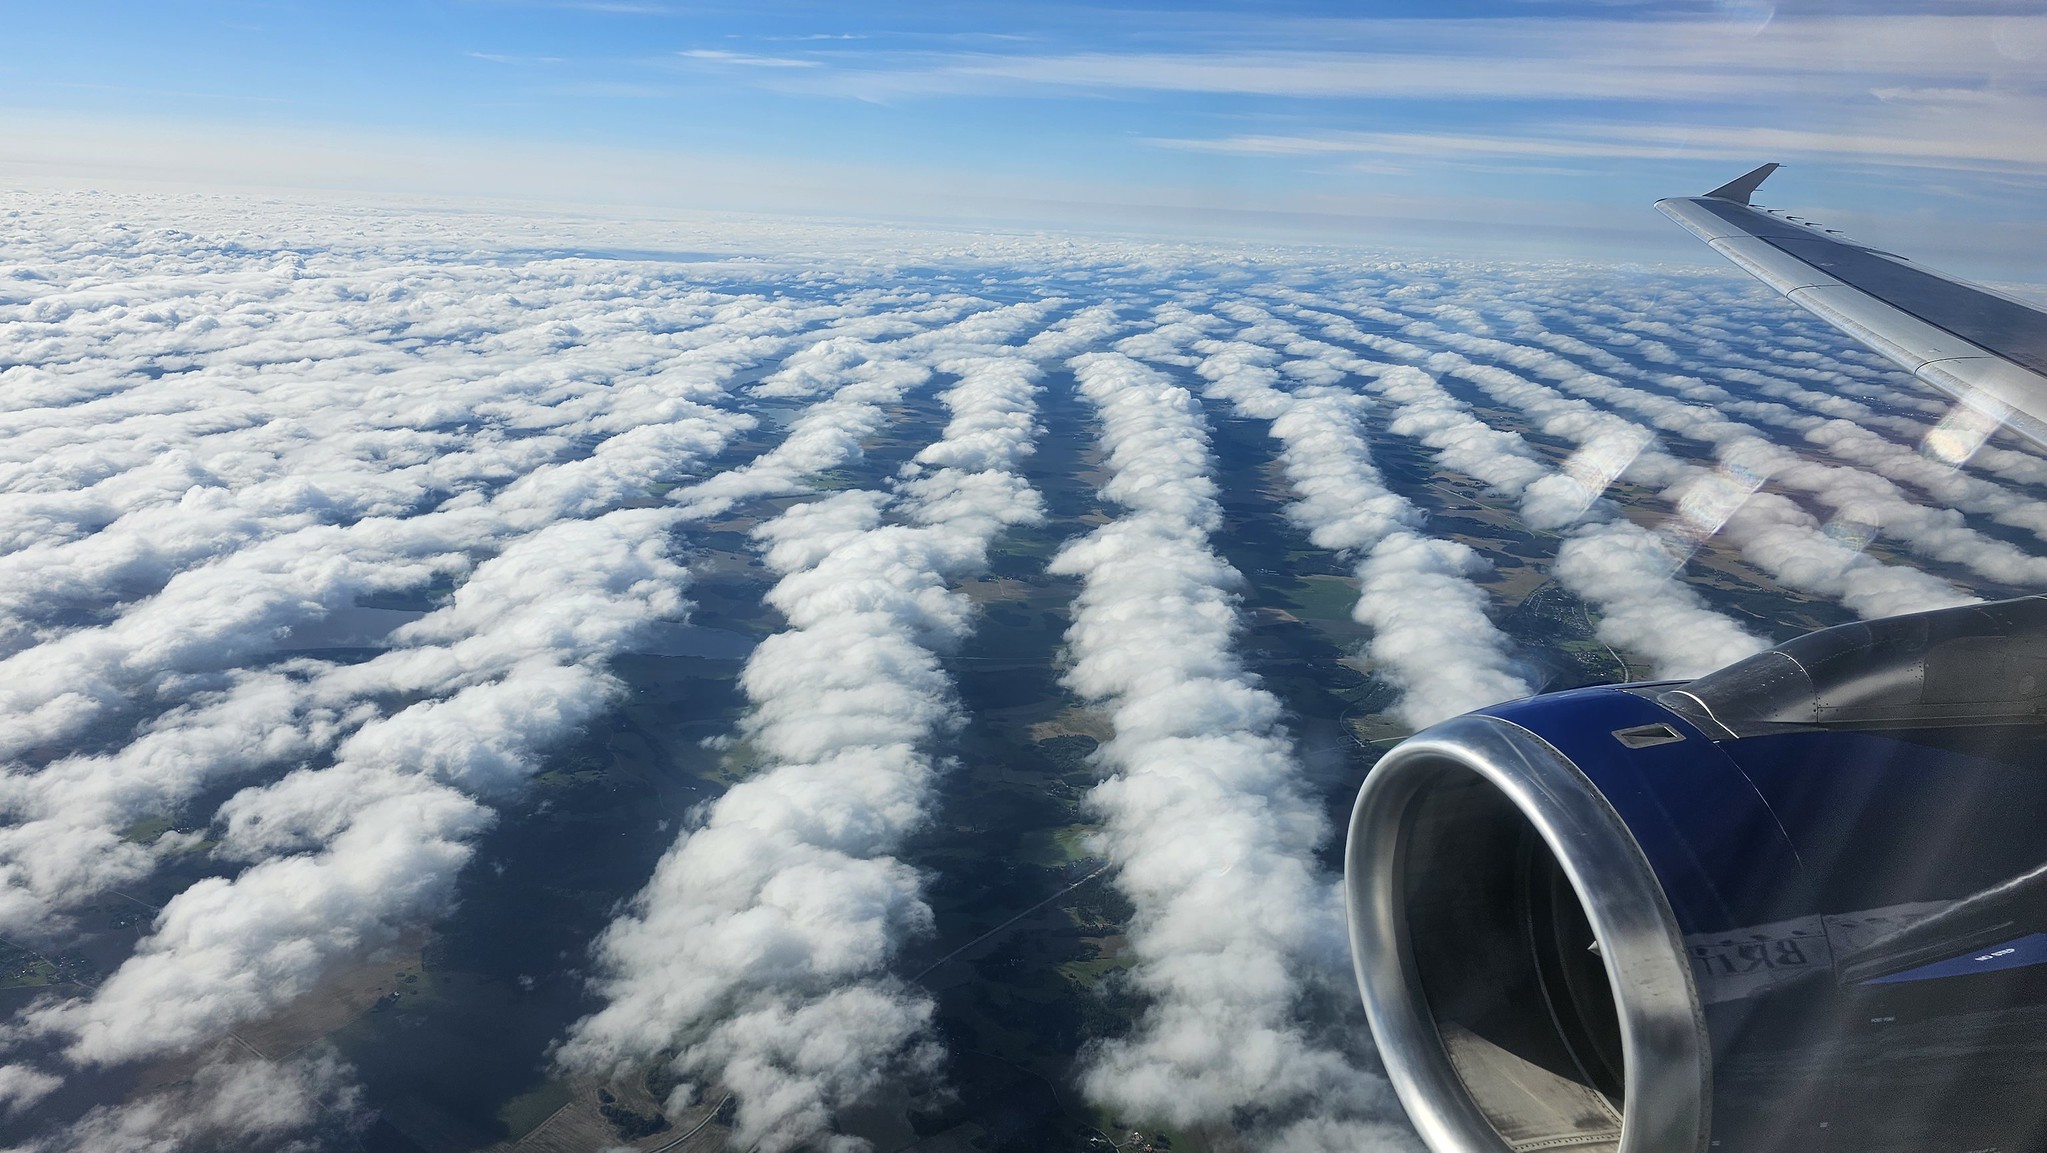 Cloud patterns on the way to Stockholm